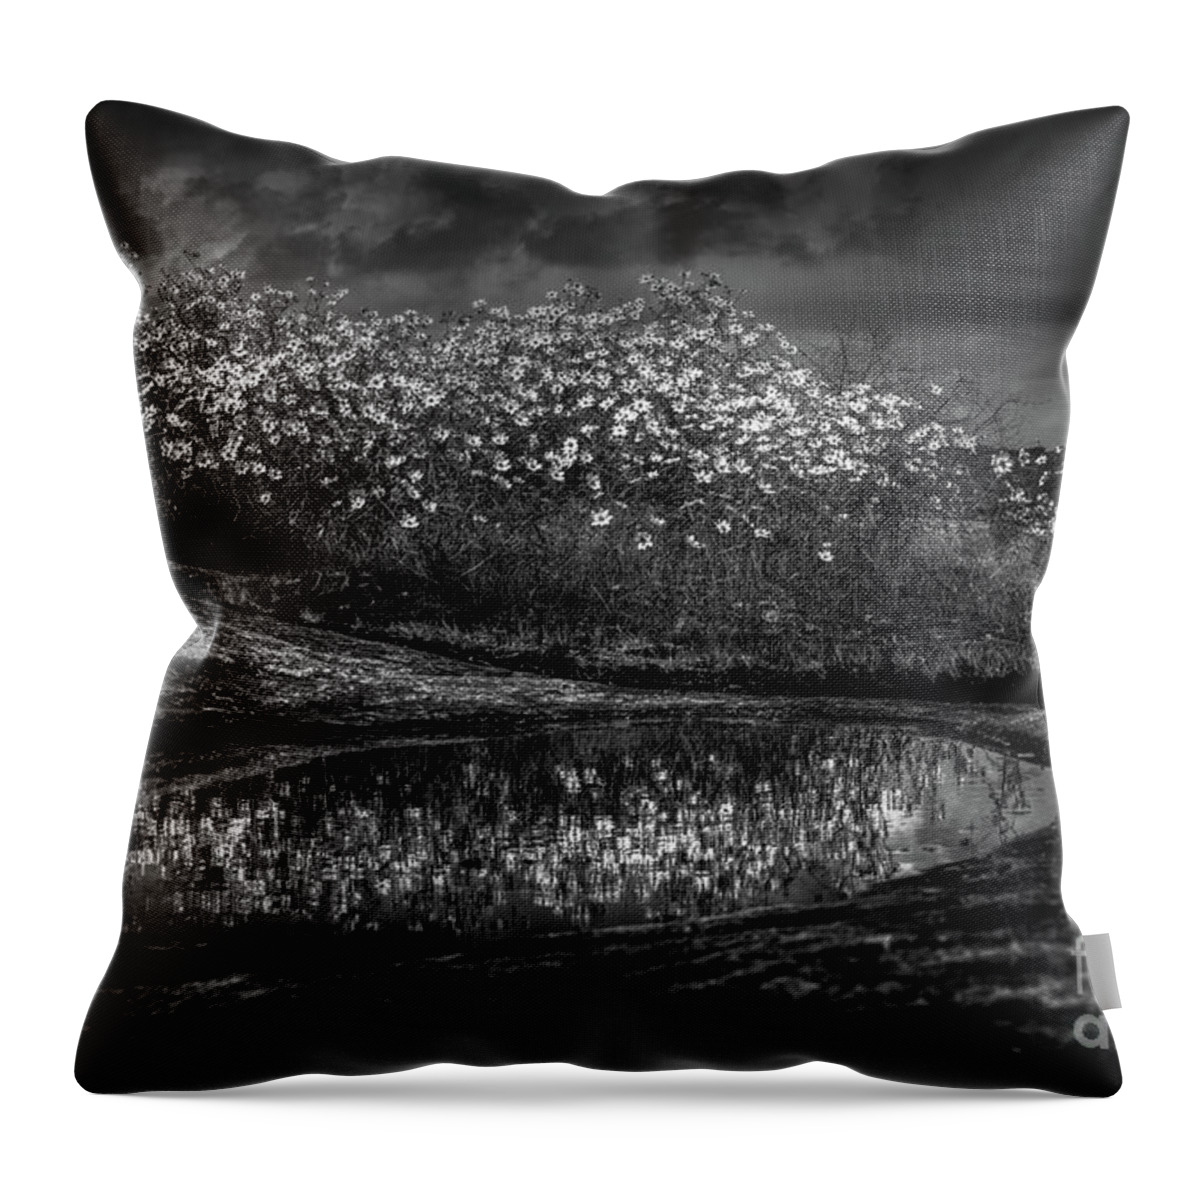 Black And White Throw Pillow featuring the photograph Untitled 4 by Doug Sturgess